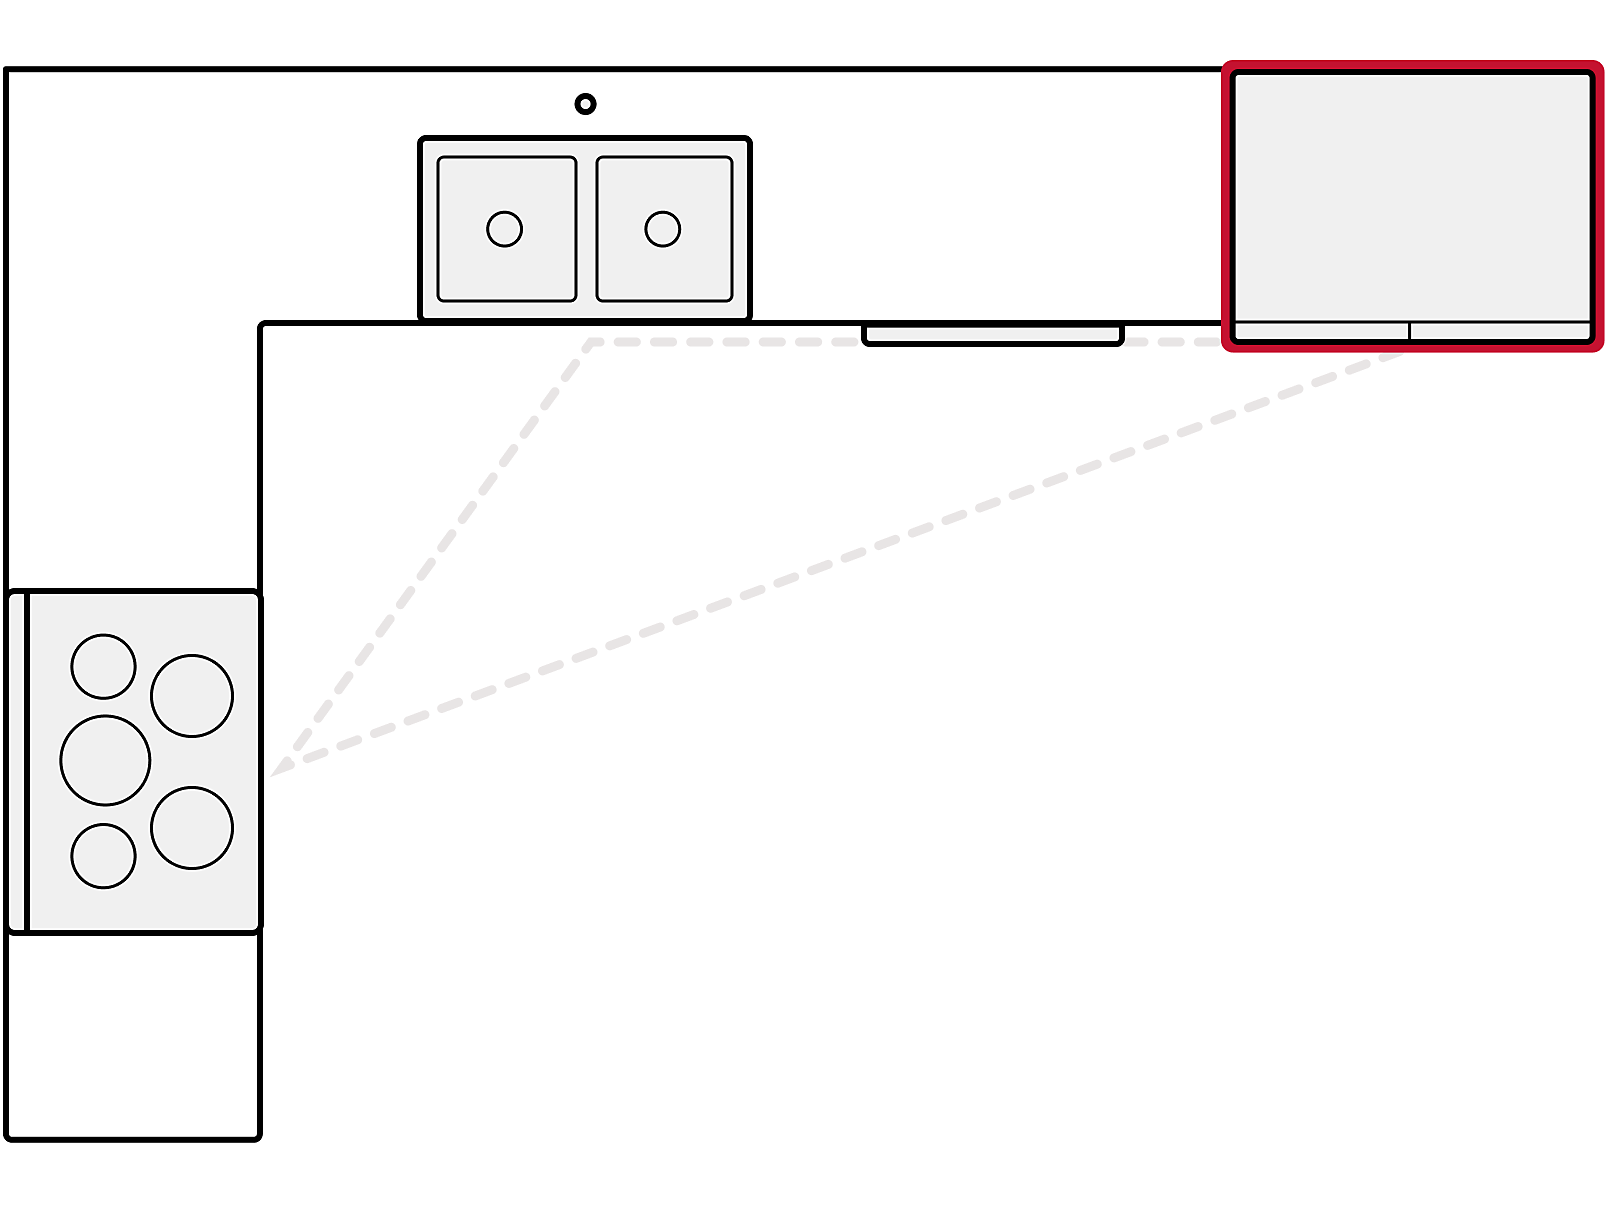 Diagram showing refrigerator placement in L-shaped kitchen